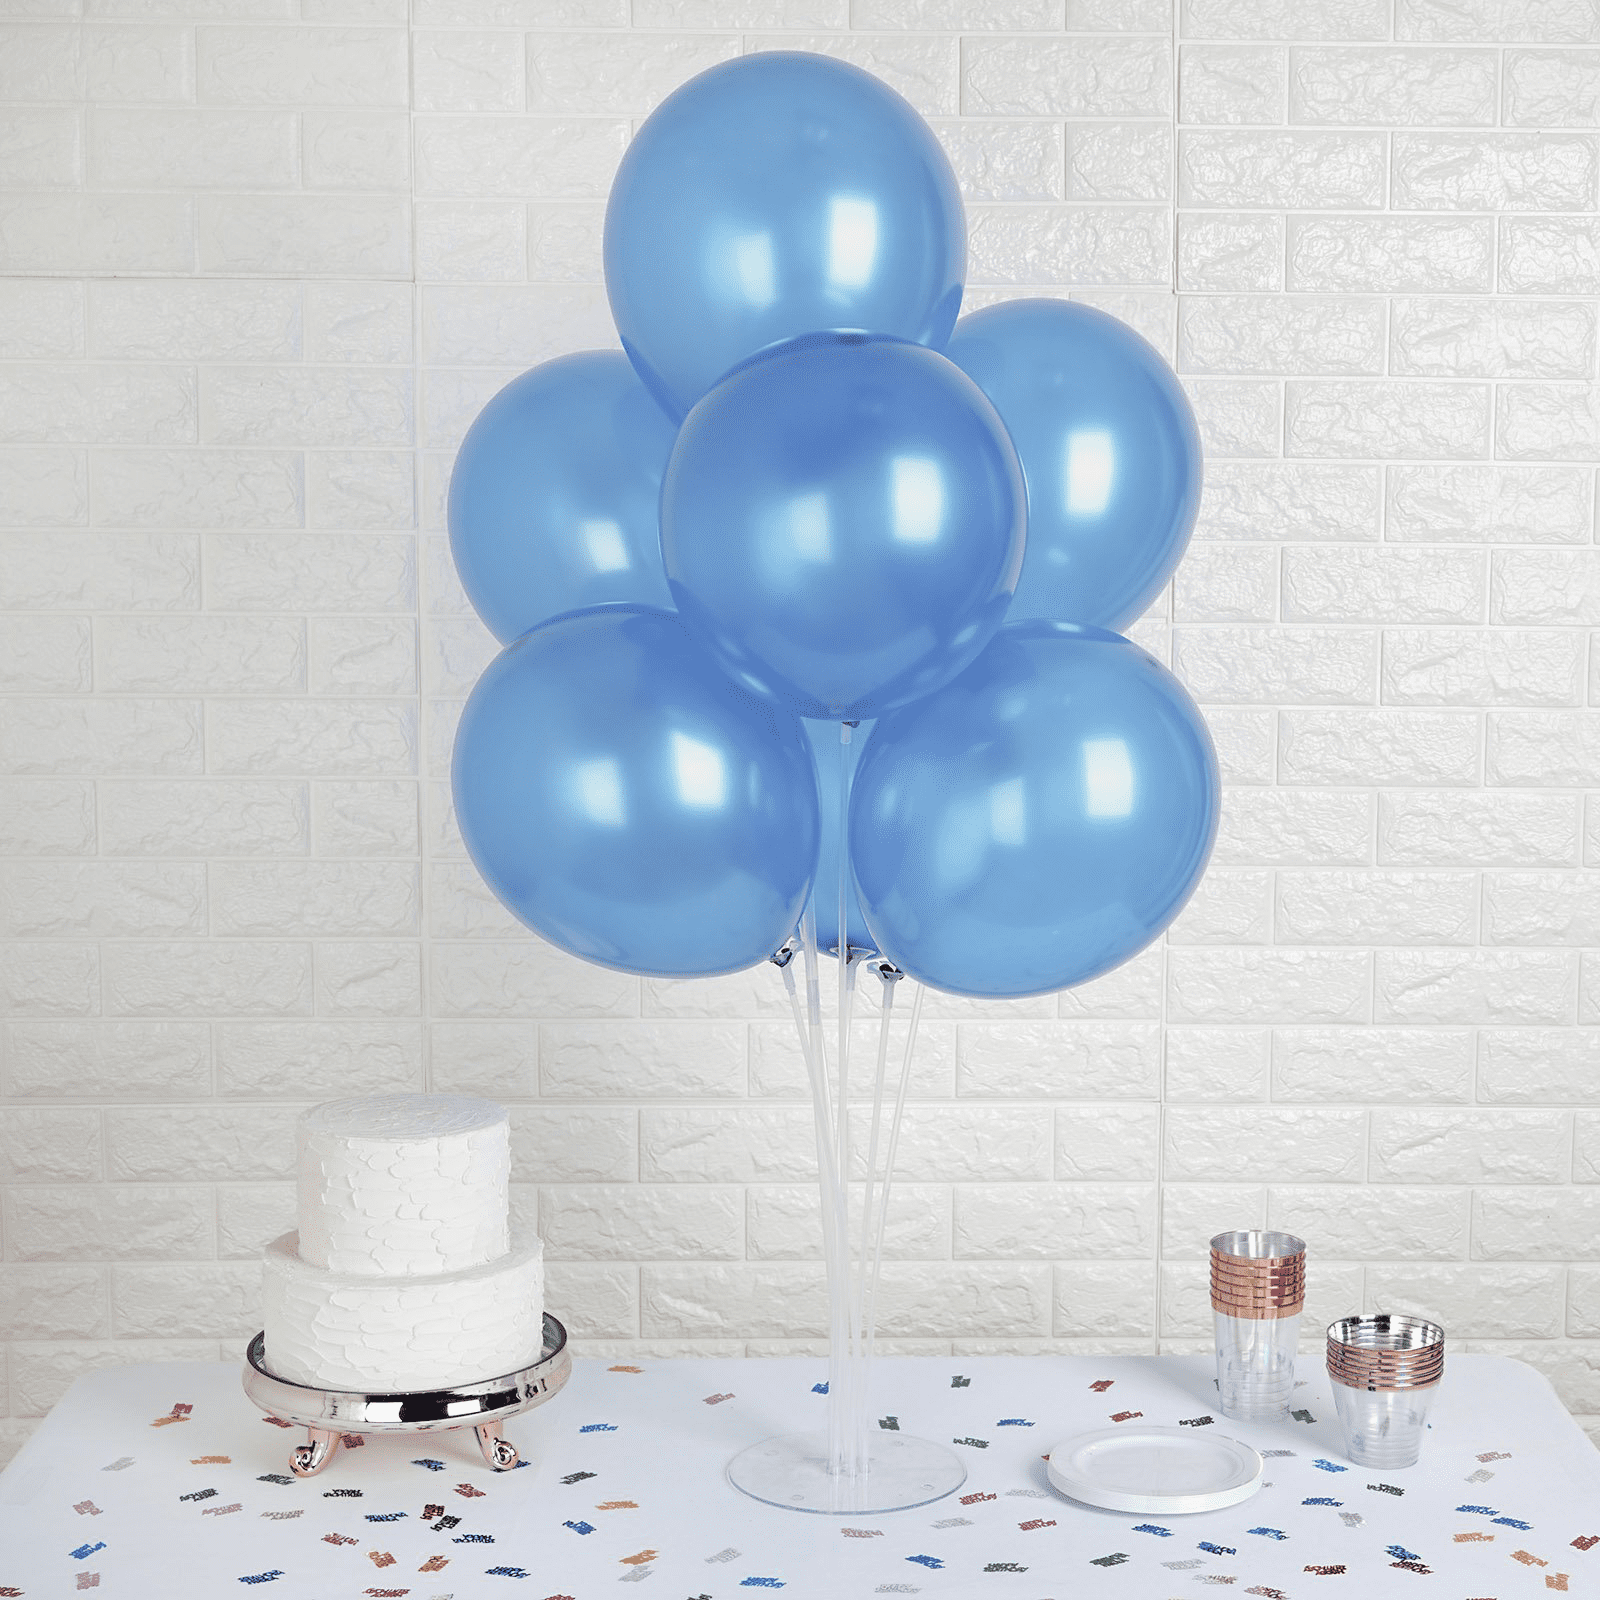 Details about   Grey 11" Qualatex Latex Helium Balloons Decorator Birthday Wedding Event Party 